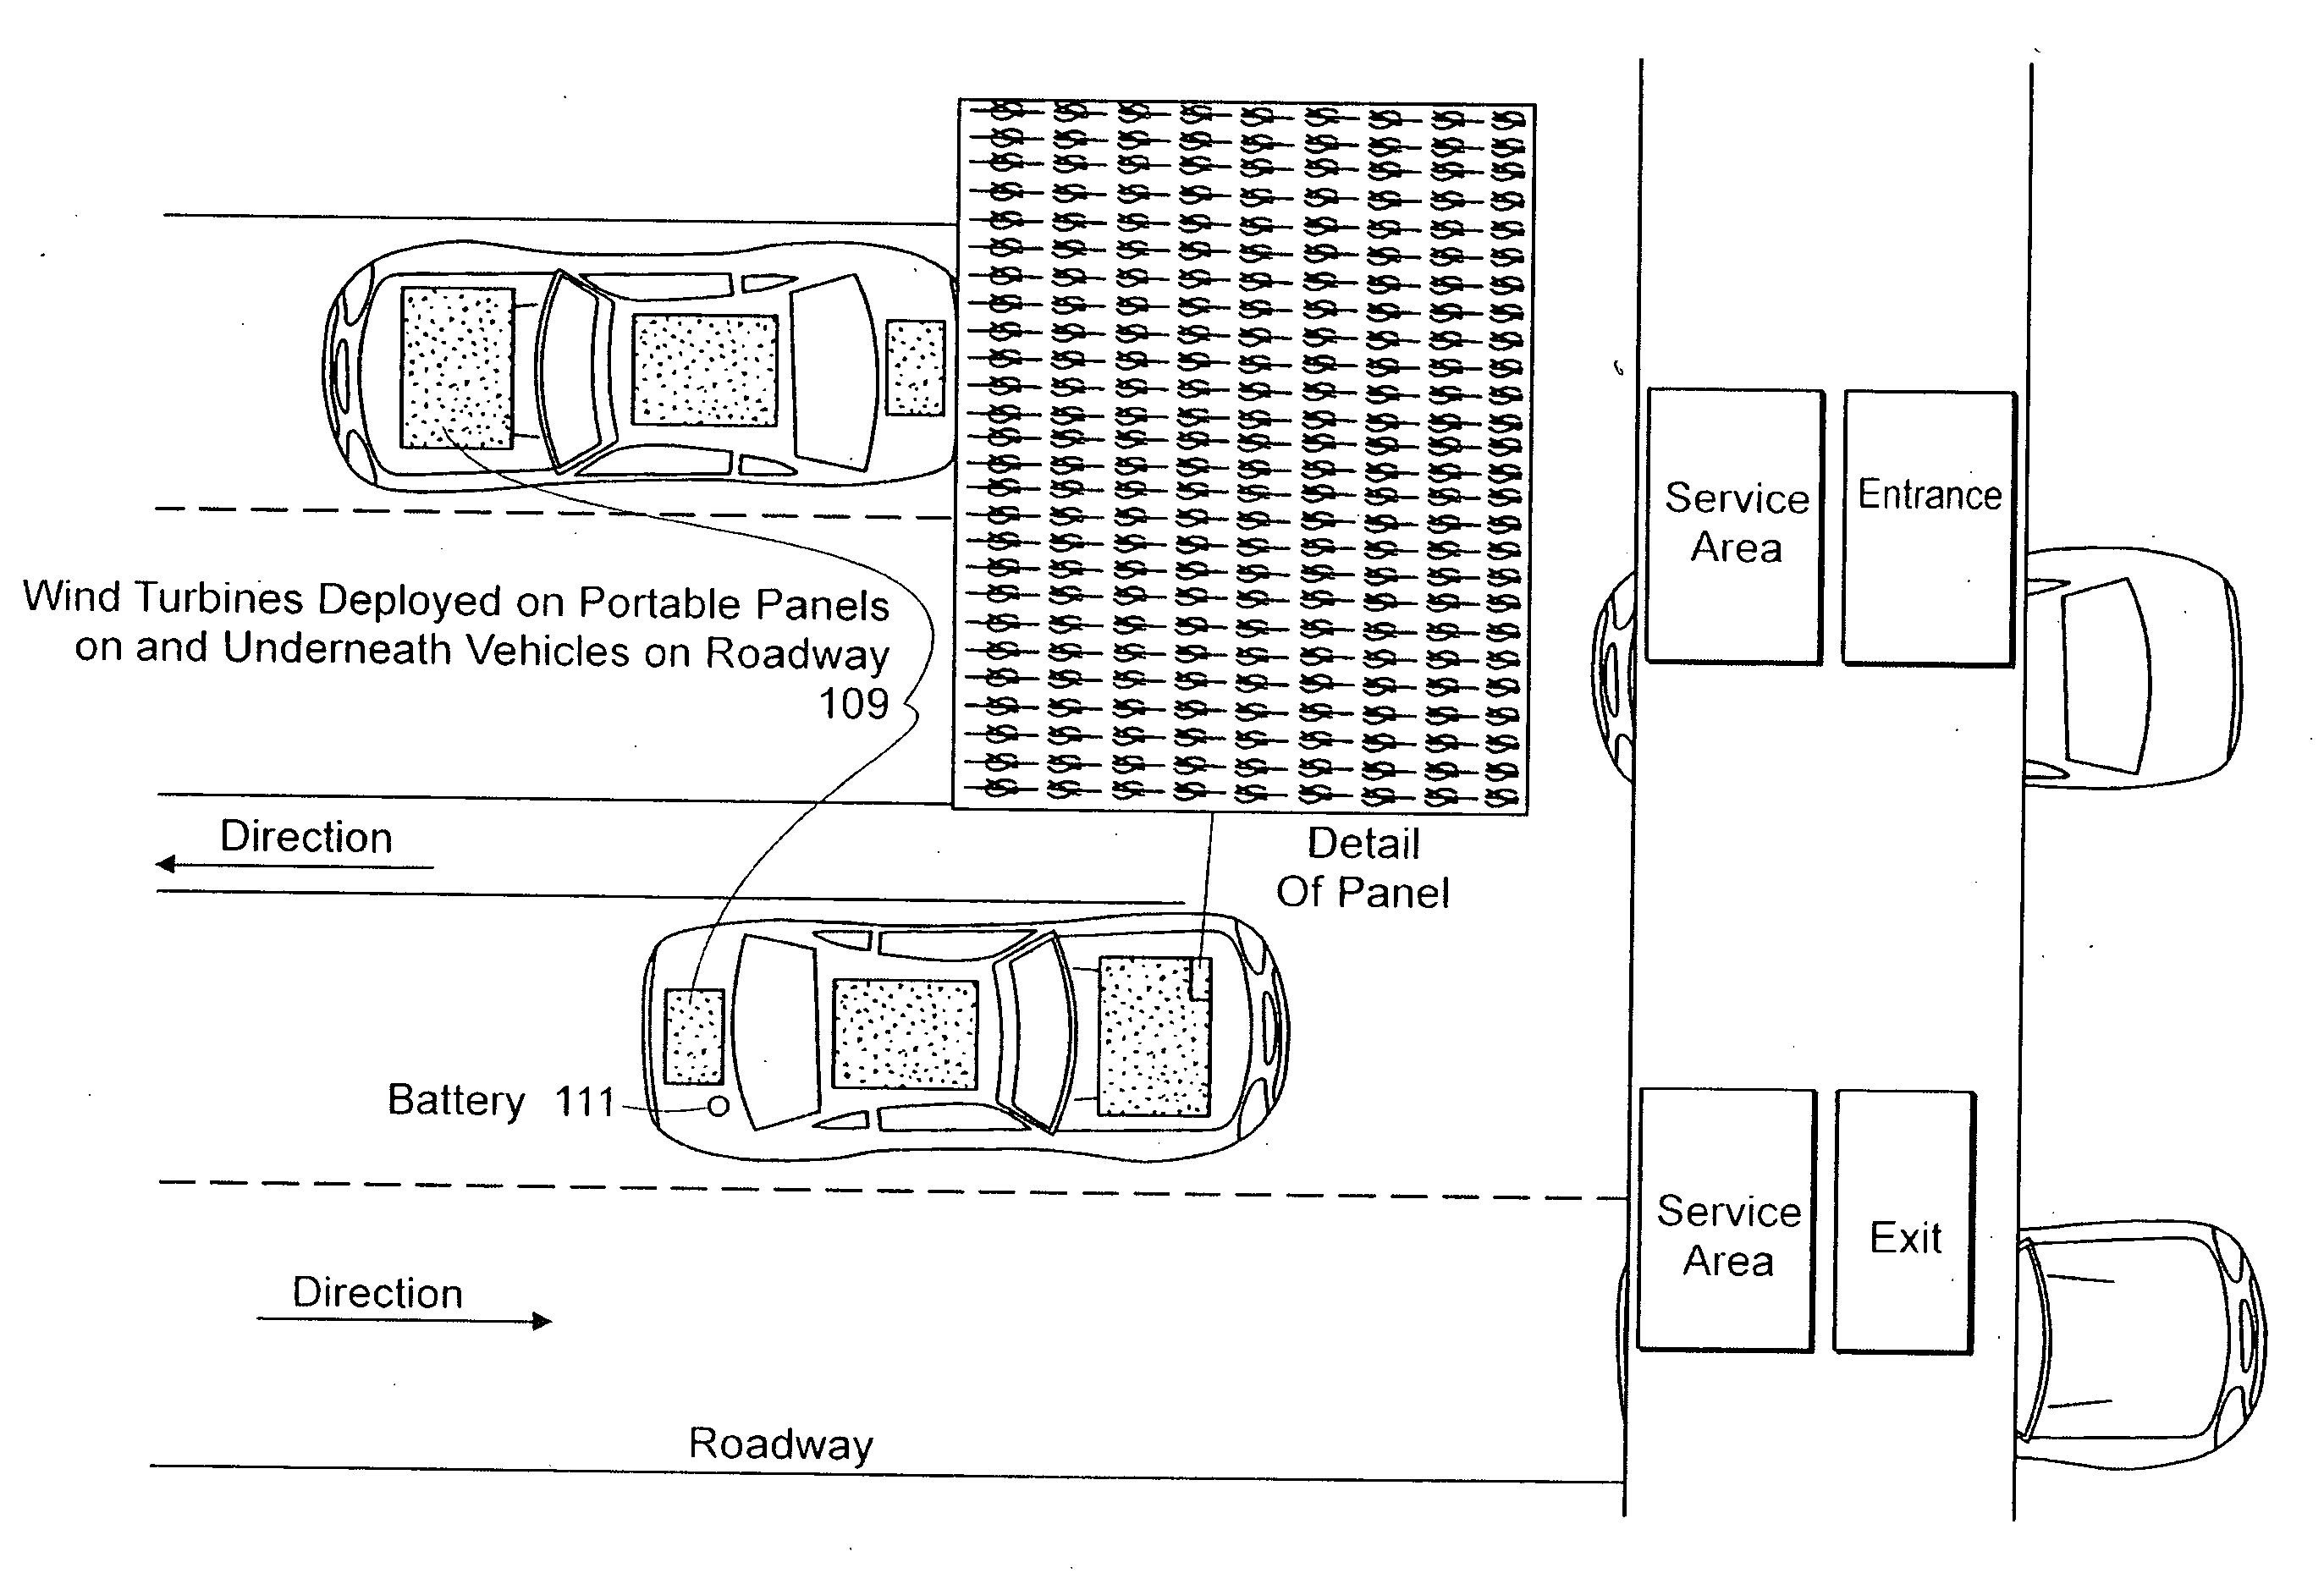 System and method for creating a networked infrastructure distribution platform of fixed and mobile solar and wind gathering devices